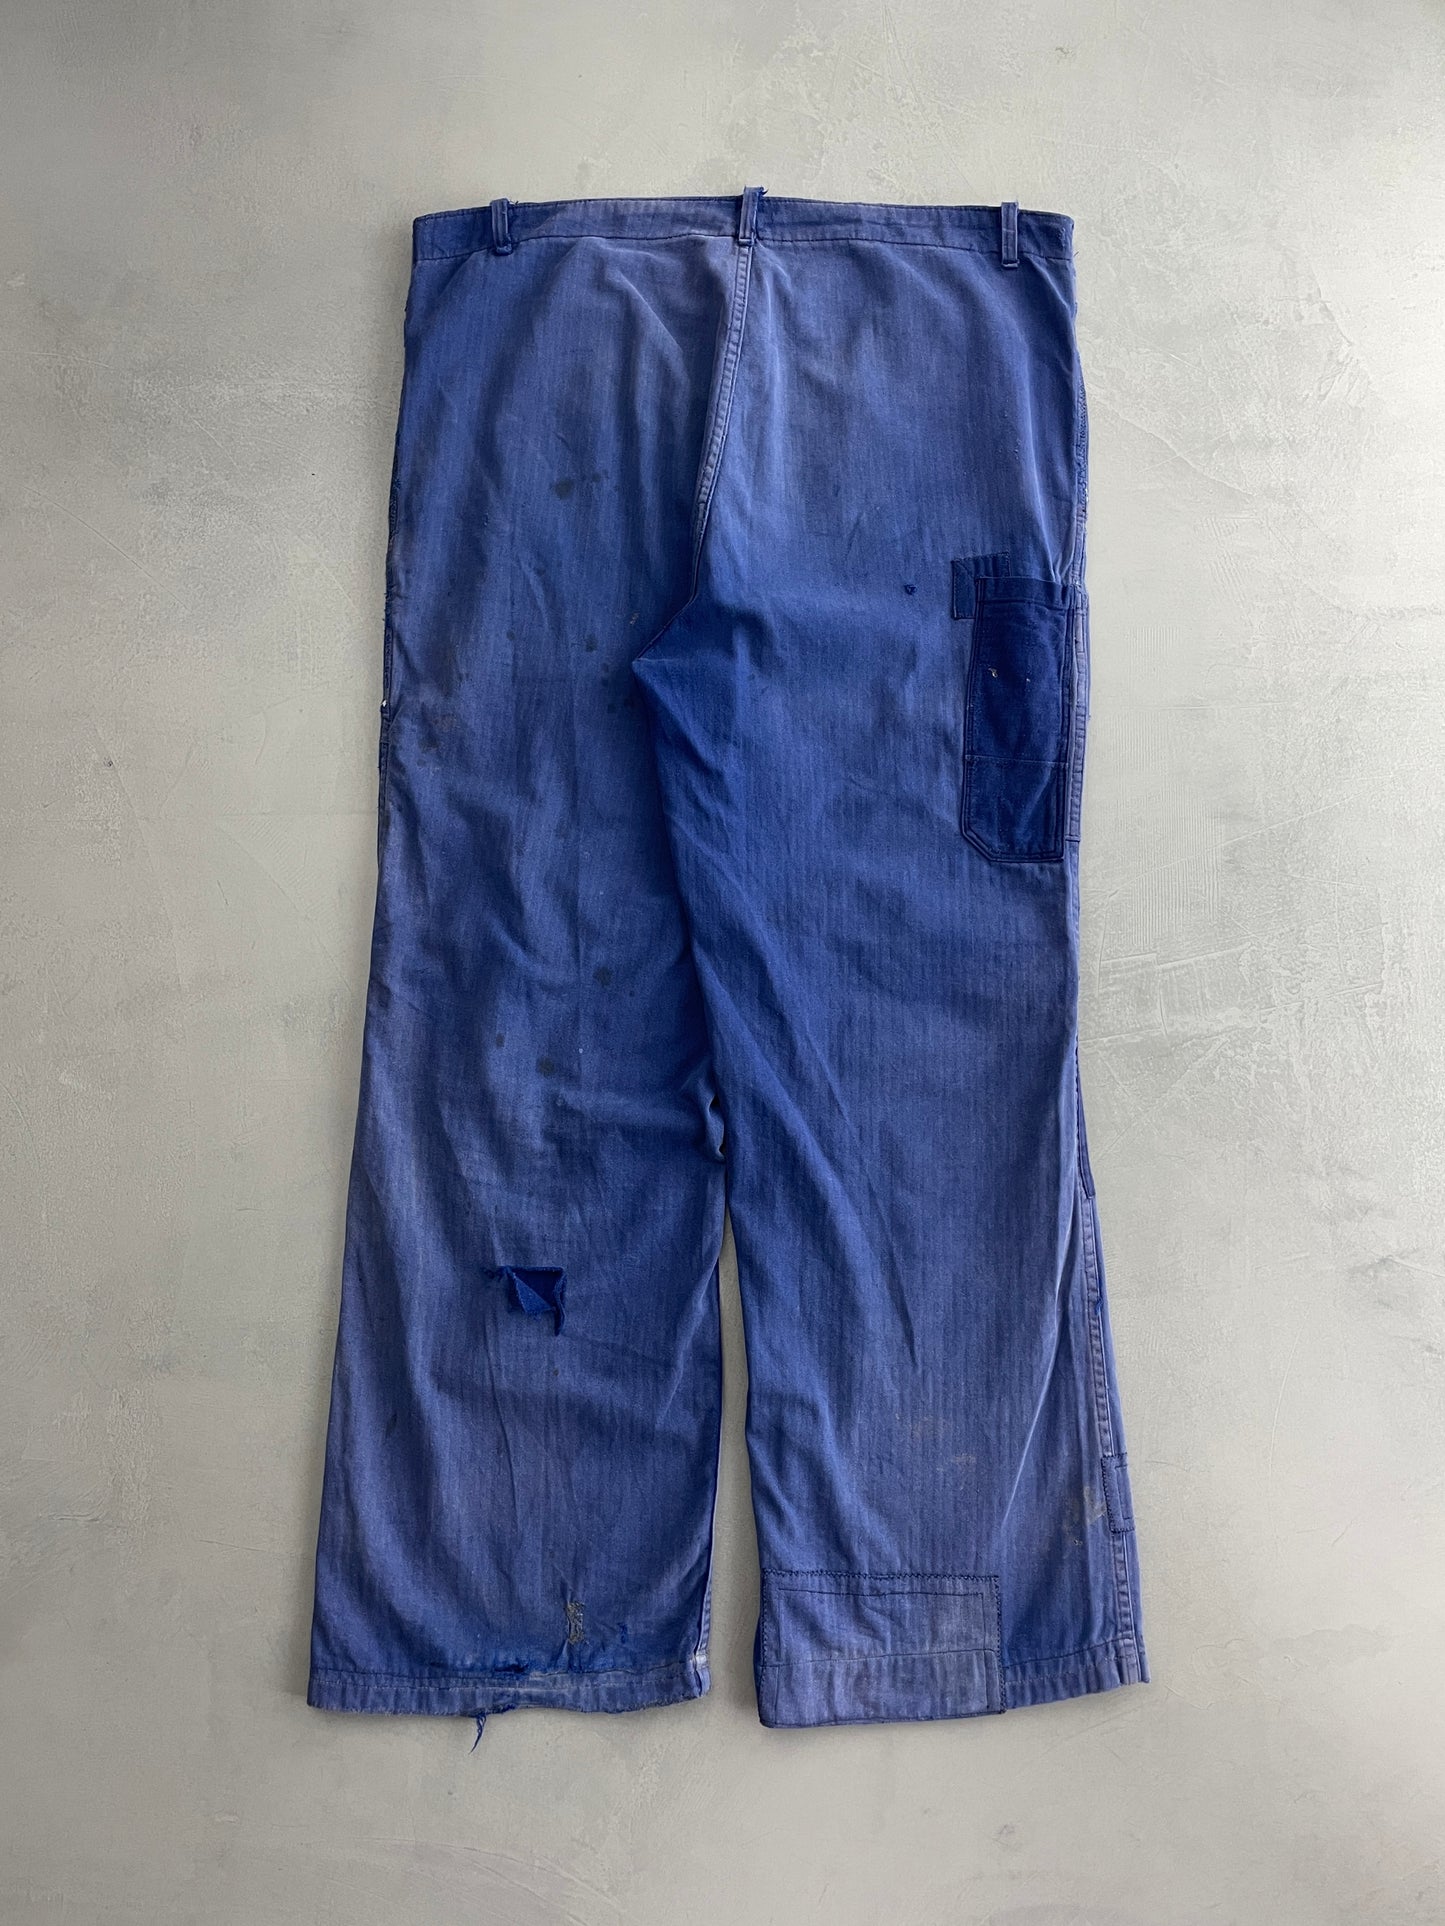 Patched/Repaired H.B.T. Work Pants [36"]